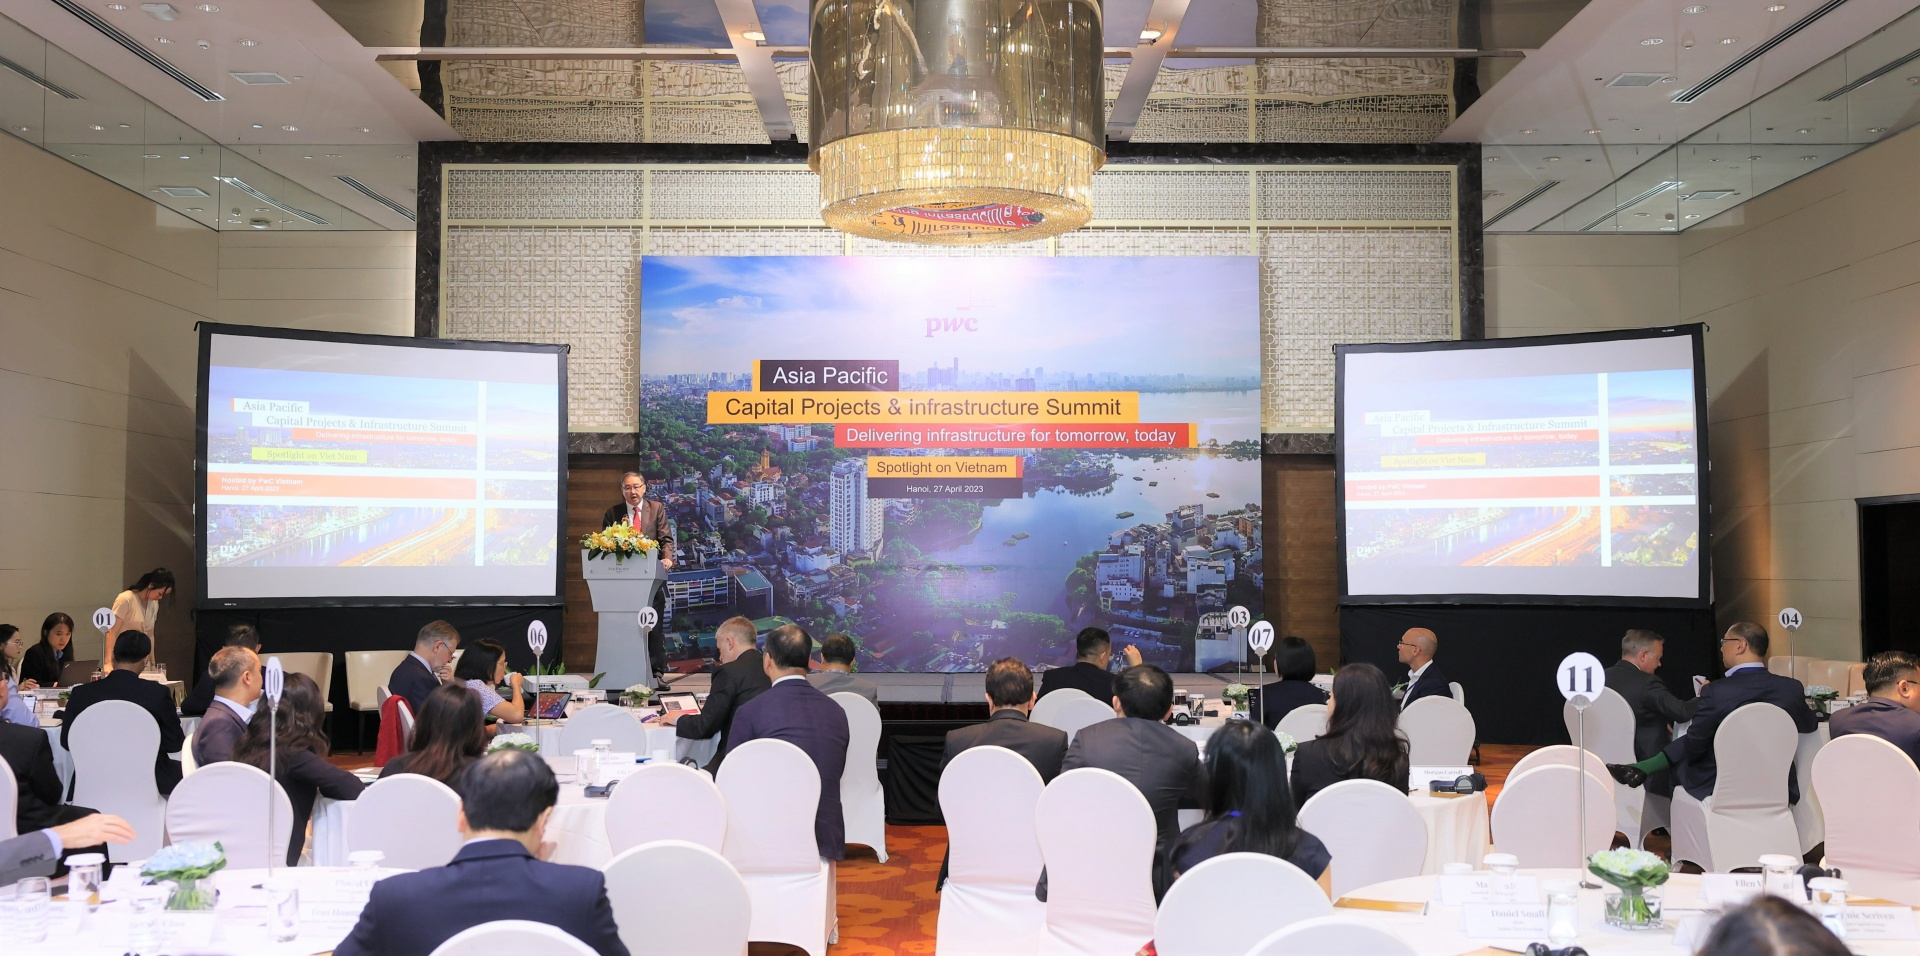 Asia-Pacific Capital Projects & Infrastructure Summit spotlights sustainability